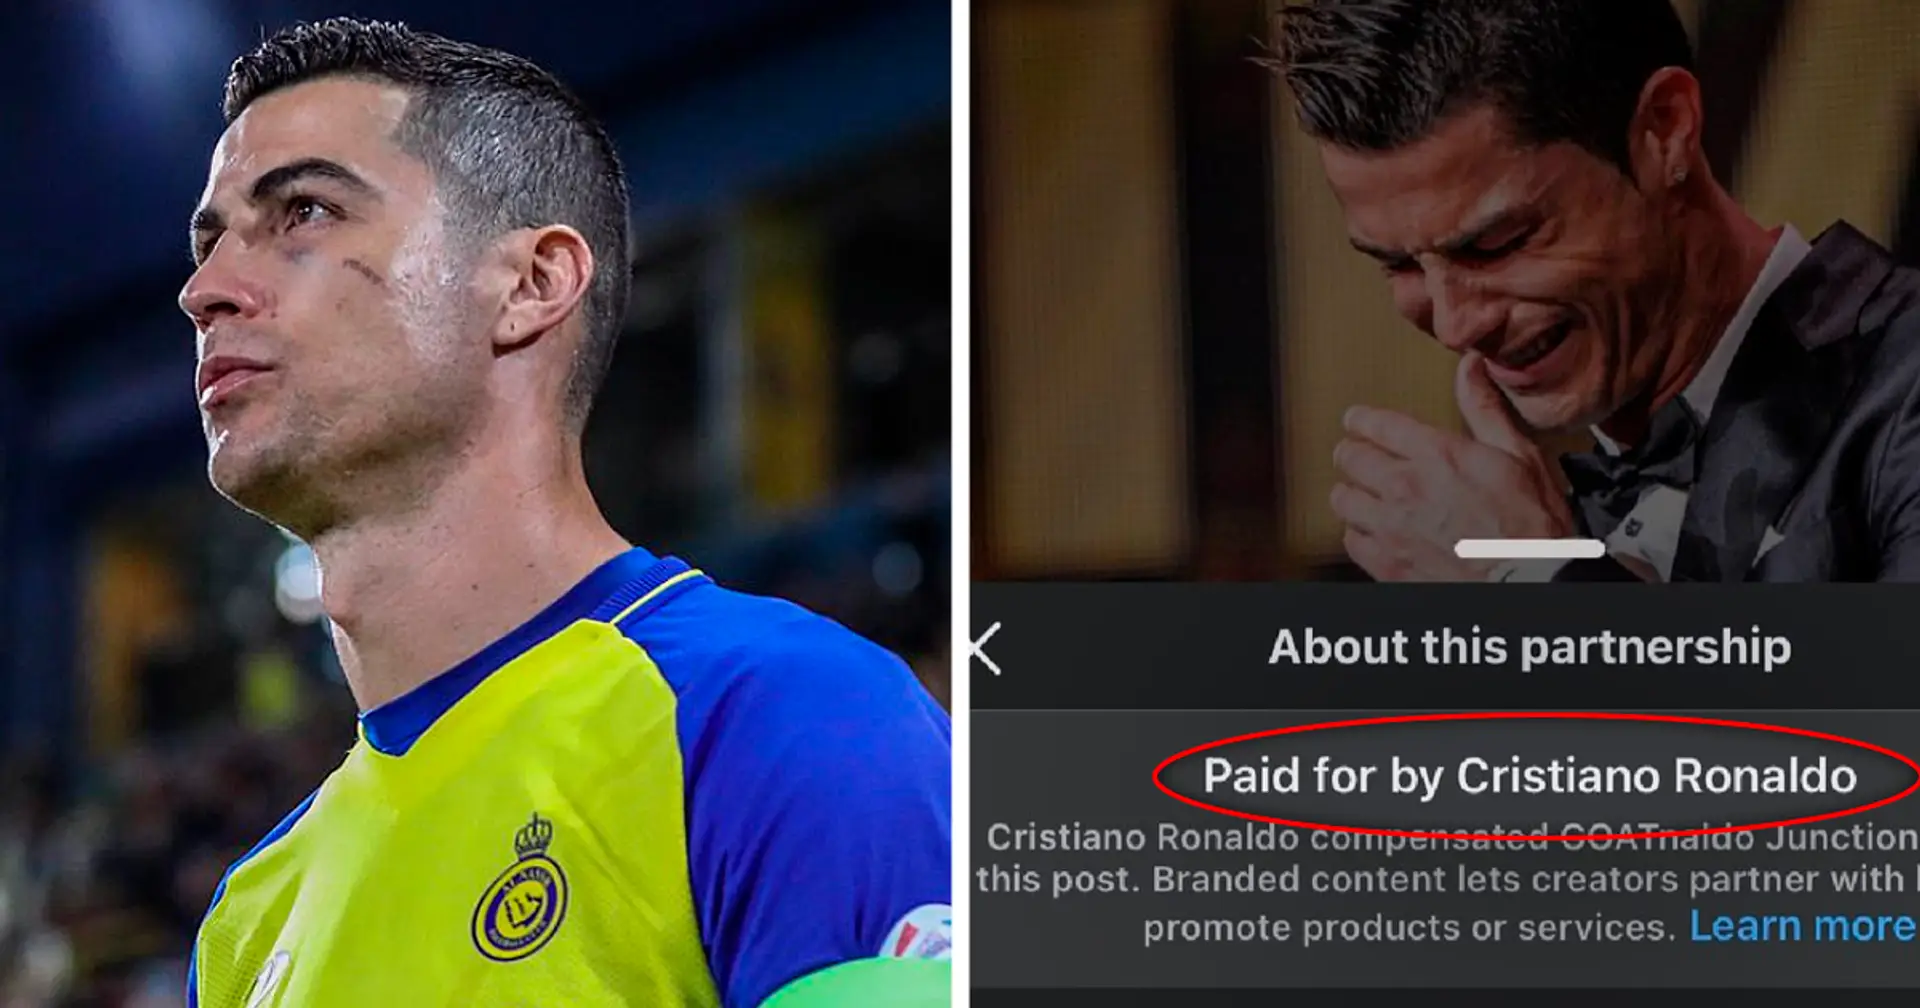 Cristiano Ronaldo's team accused of paying troll accounts on social media